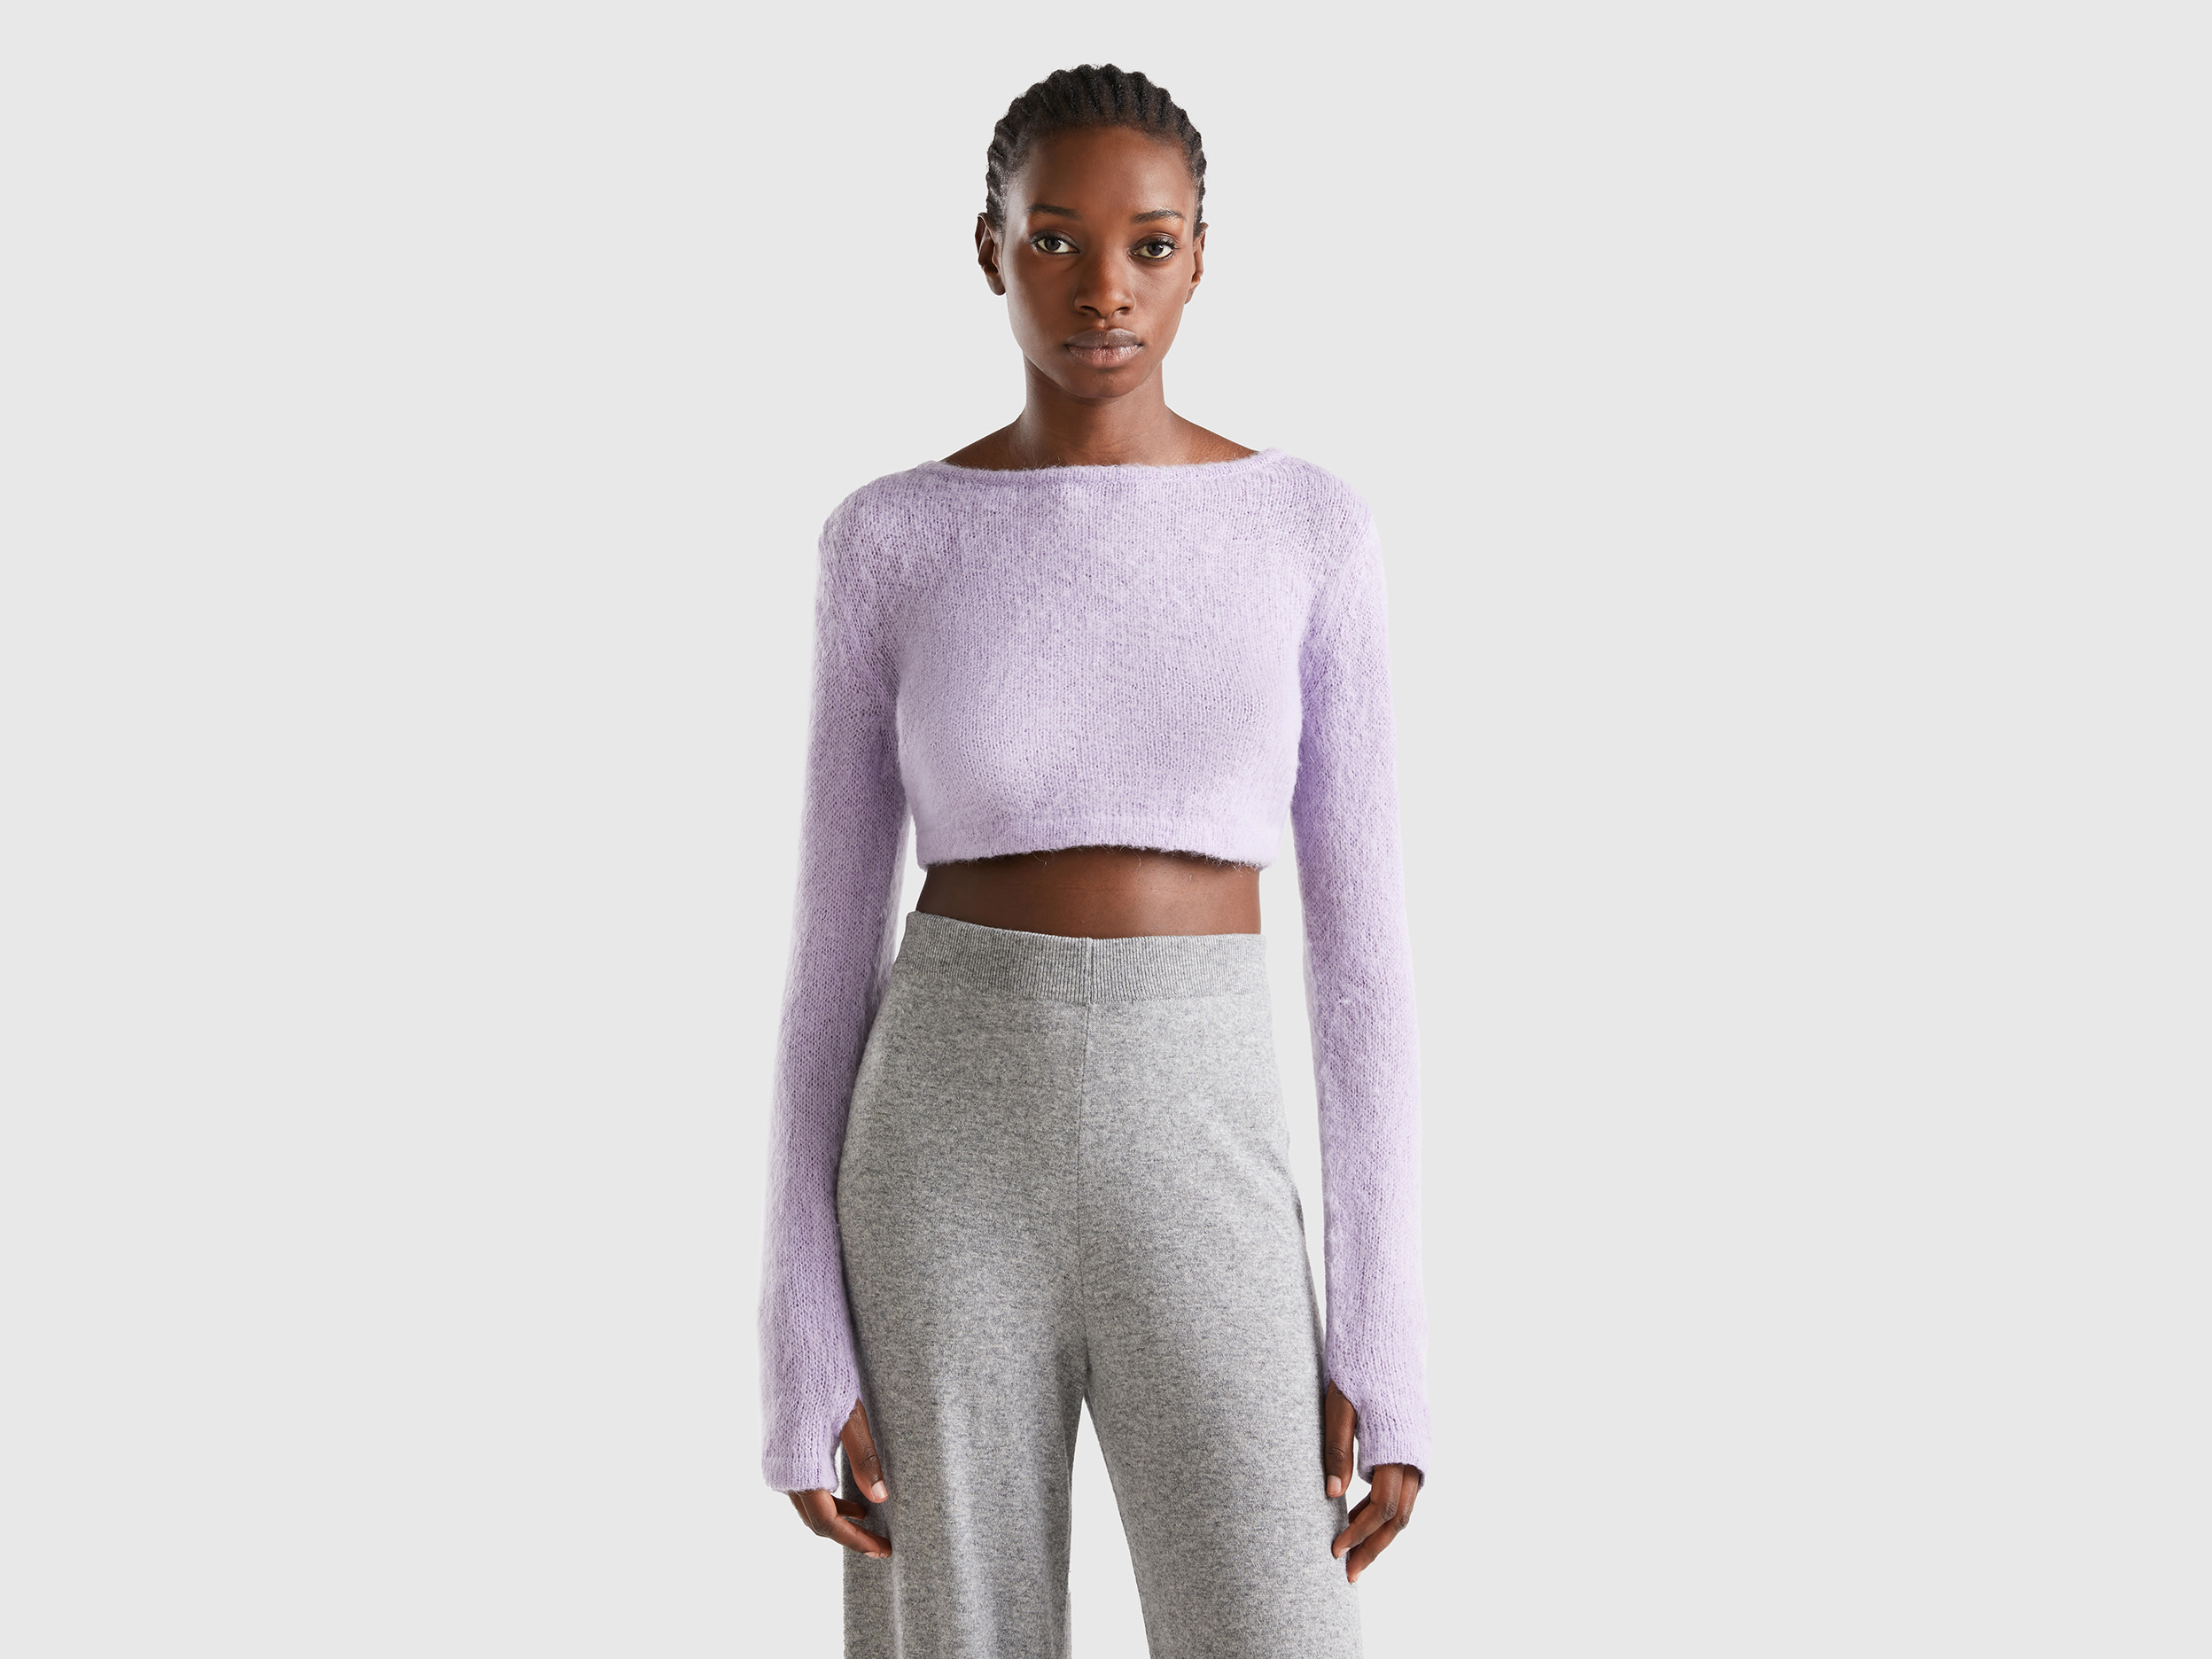 Benetton, Cropped Sweater In Mohair Blend, size XS-S, Lilac, Women